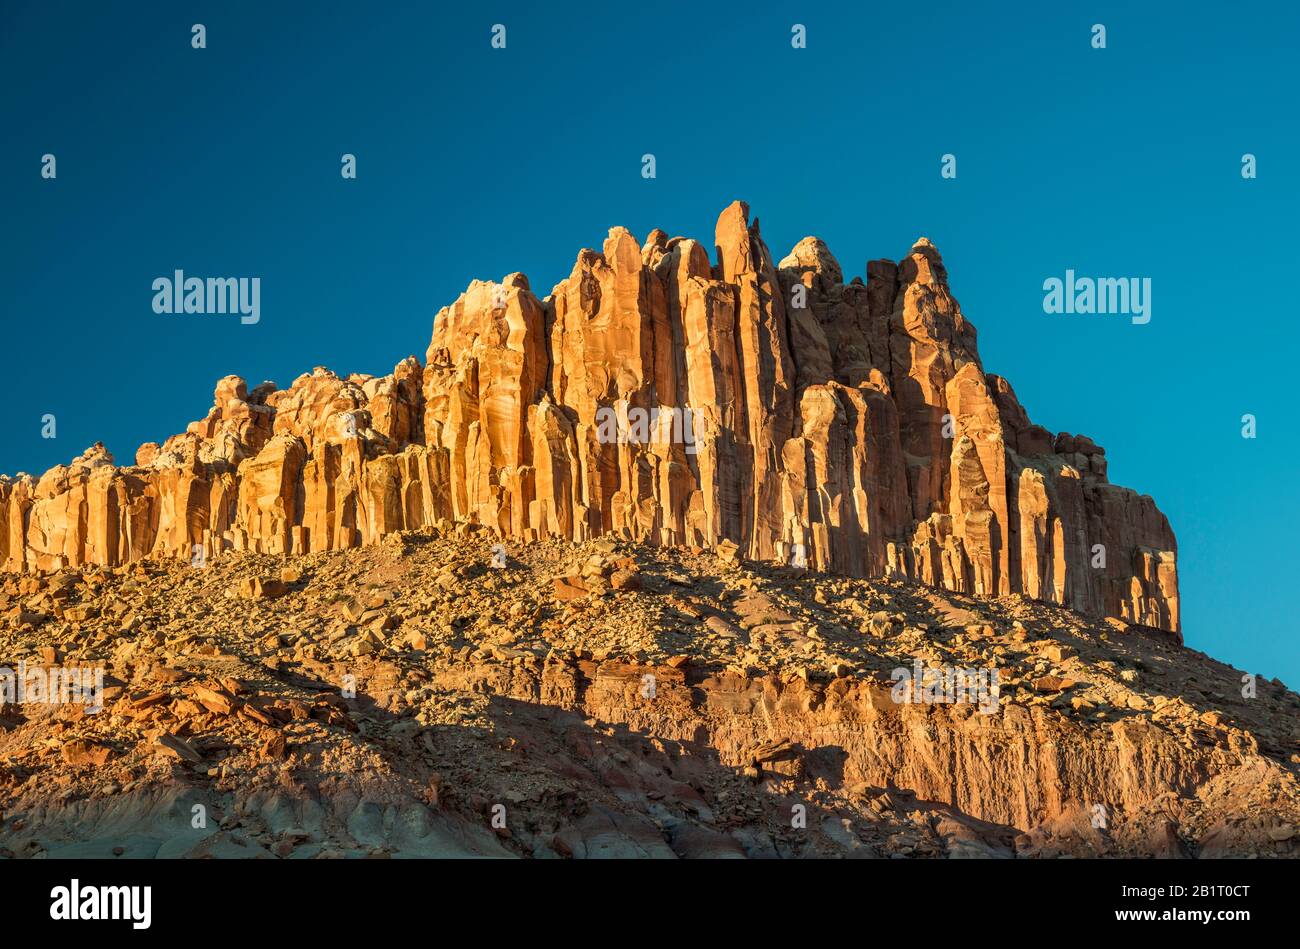 The Castle Rock at Sunset, Capitol Reef National Park, Utah, USA Stockfoto